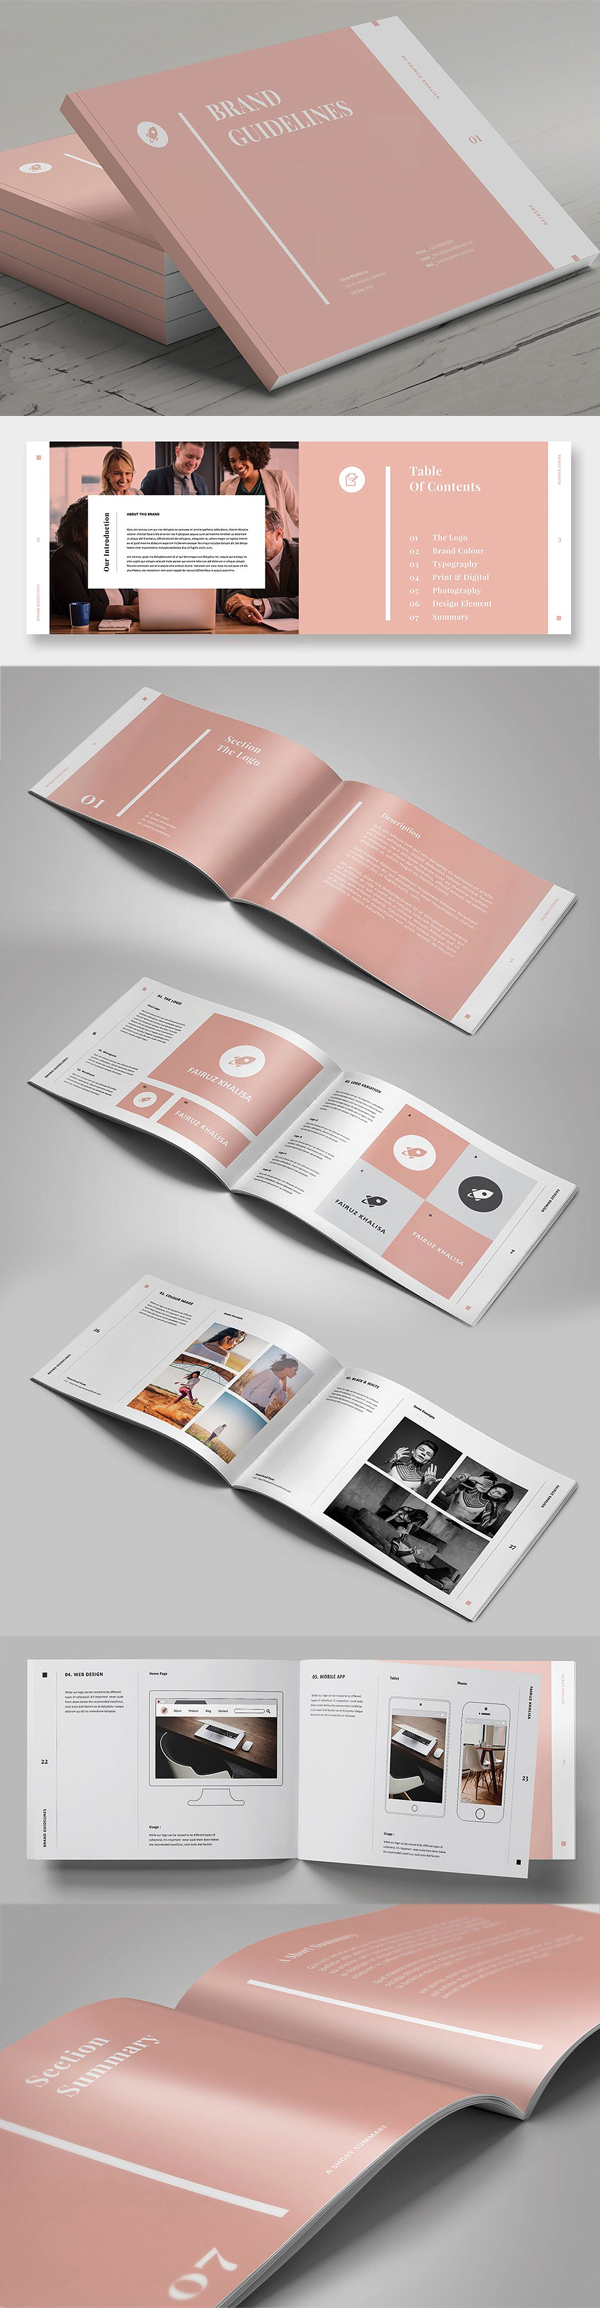 Modern Flyer Template Designs and Multi-Purpose Brochures | Advertising ...